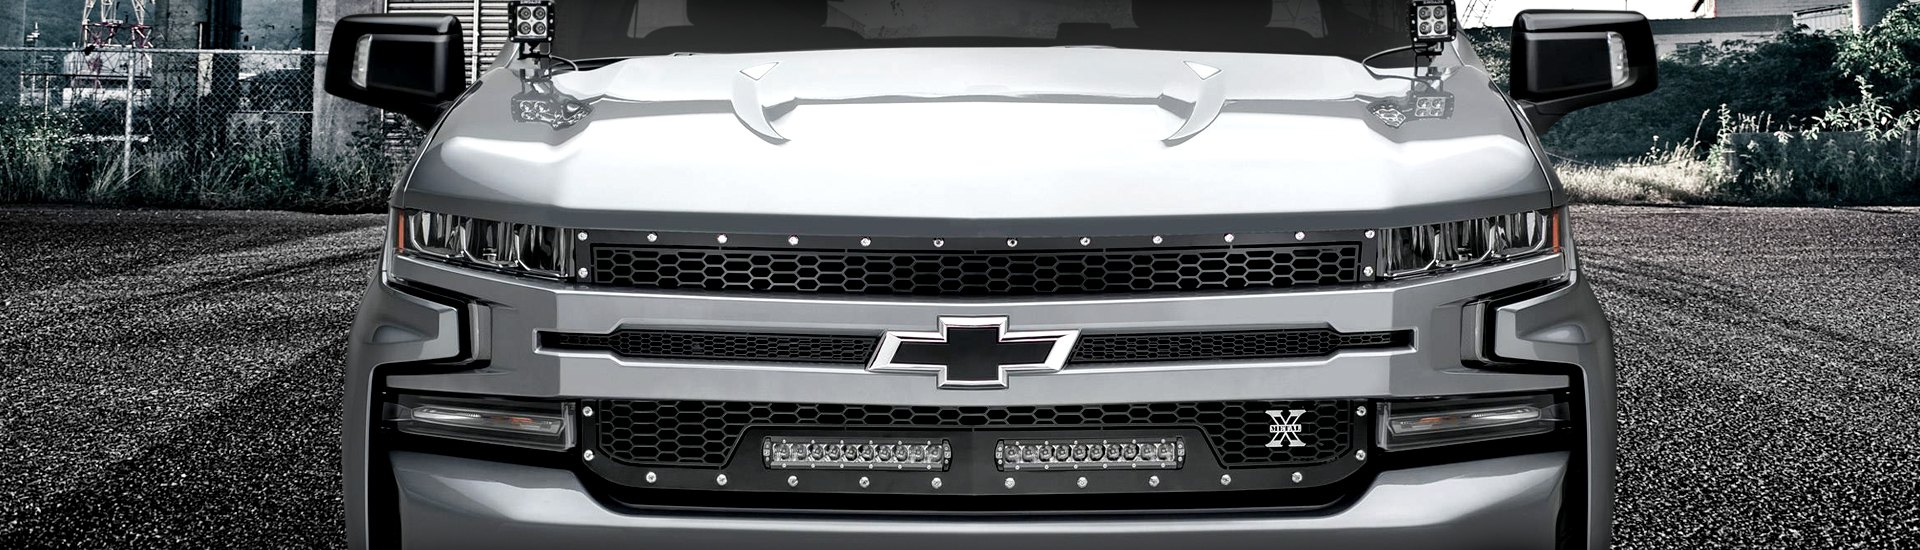 T-Rex Introduces The New Lineup of Custom Grilles for 2019 Chevy Silverado 1500